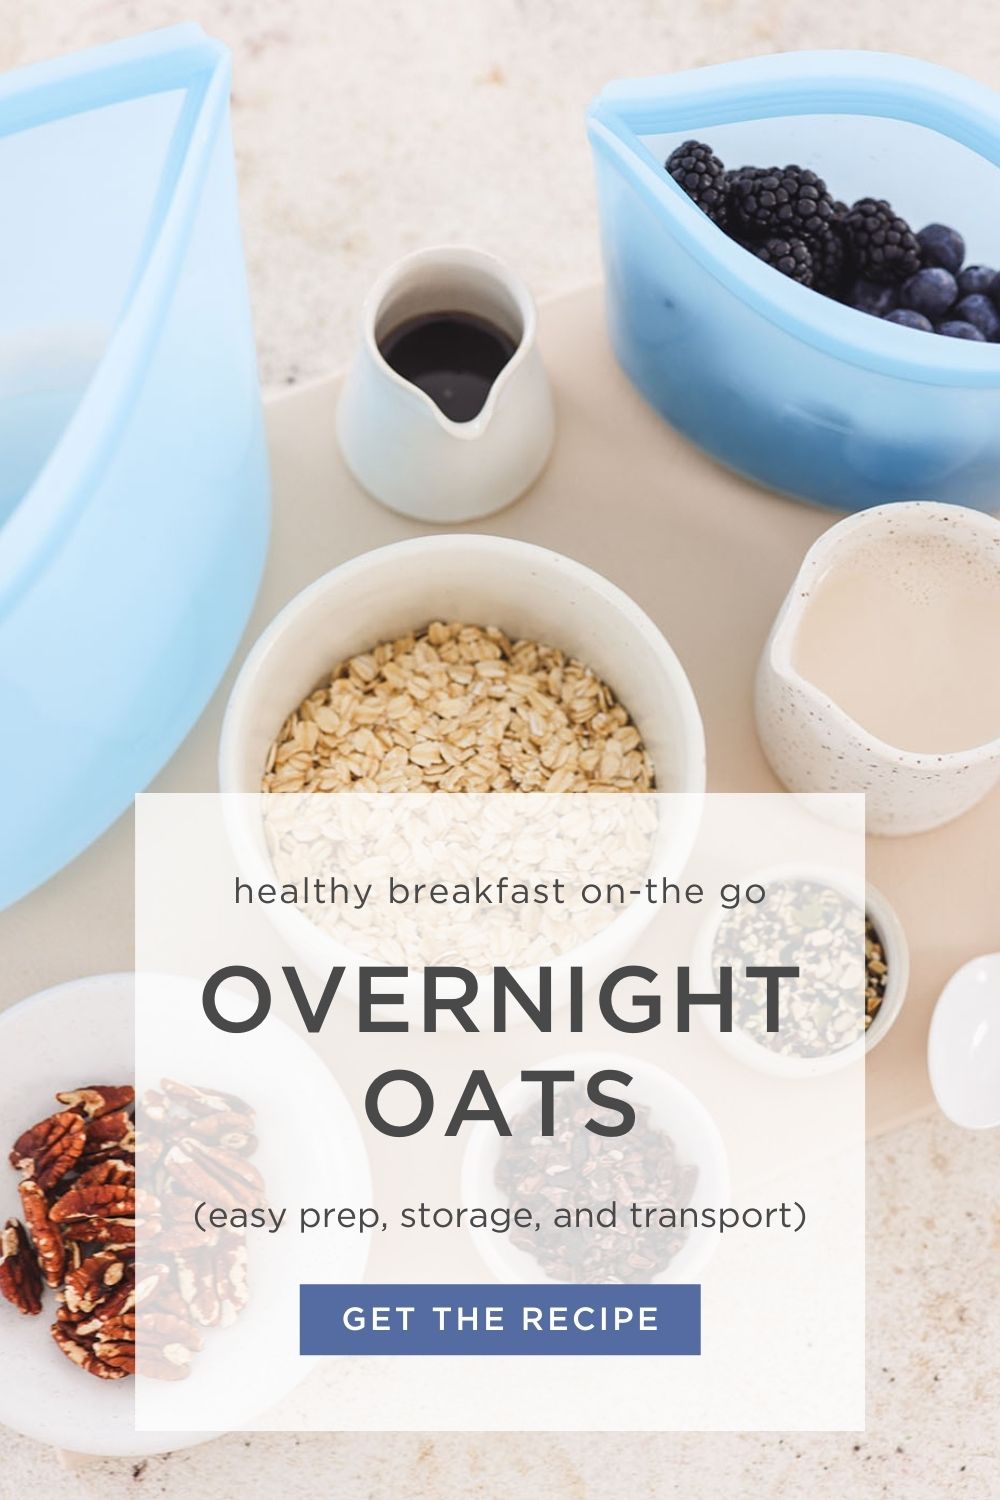 Shoppers Can't Stop Buying These Leakproof Overnight Oats